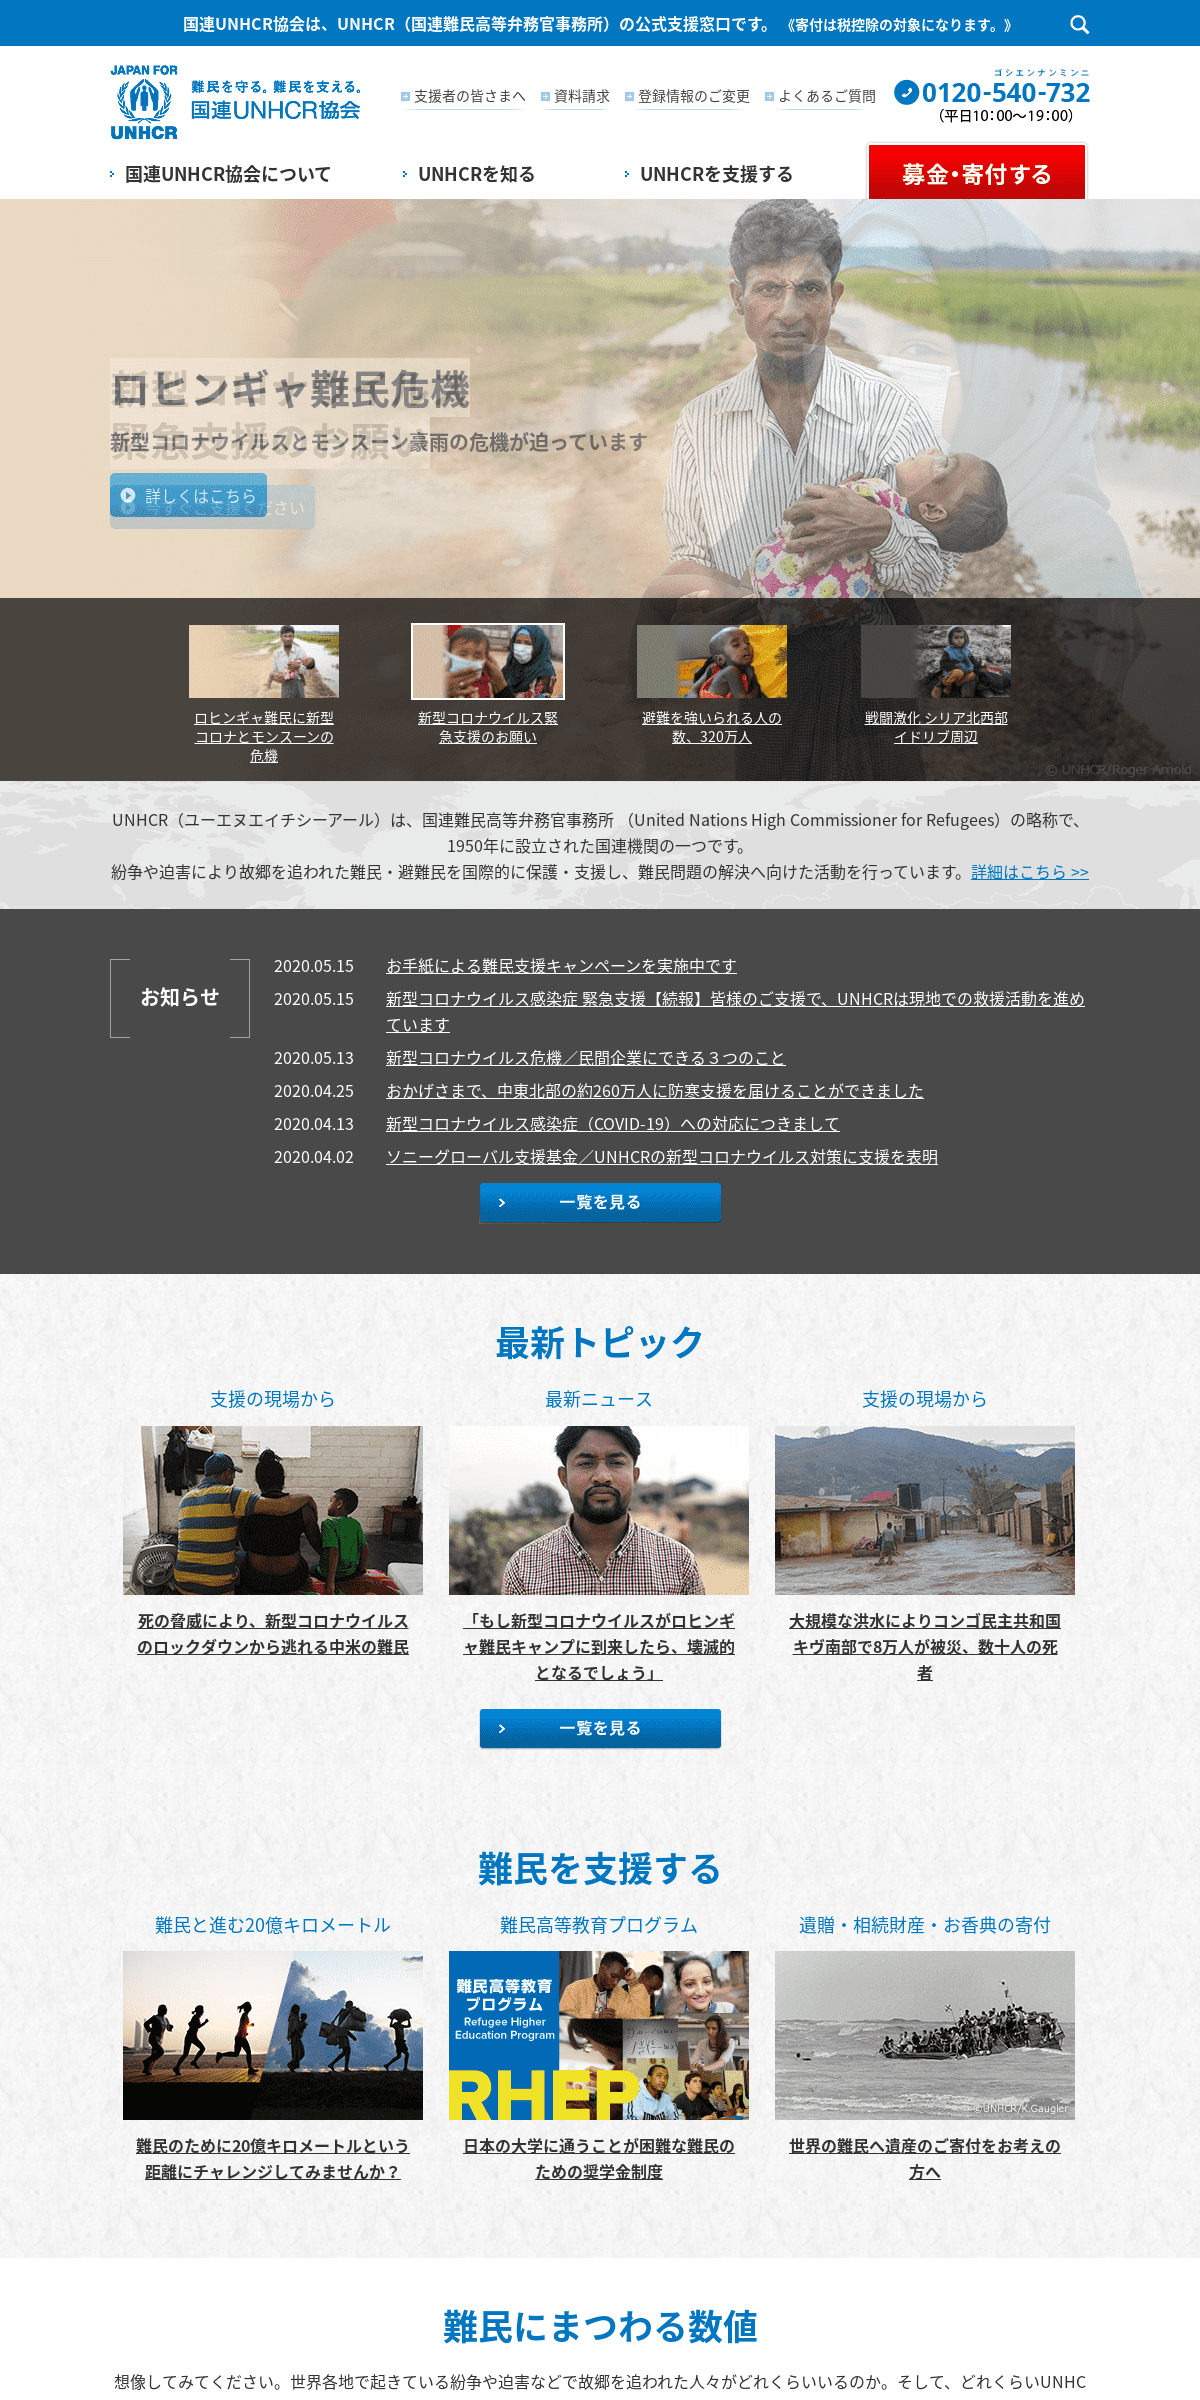 A complete backup of japanforunhcr.org